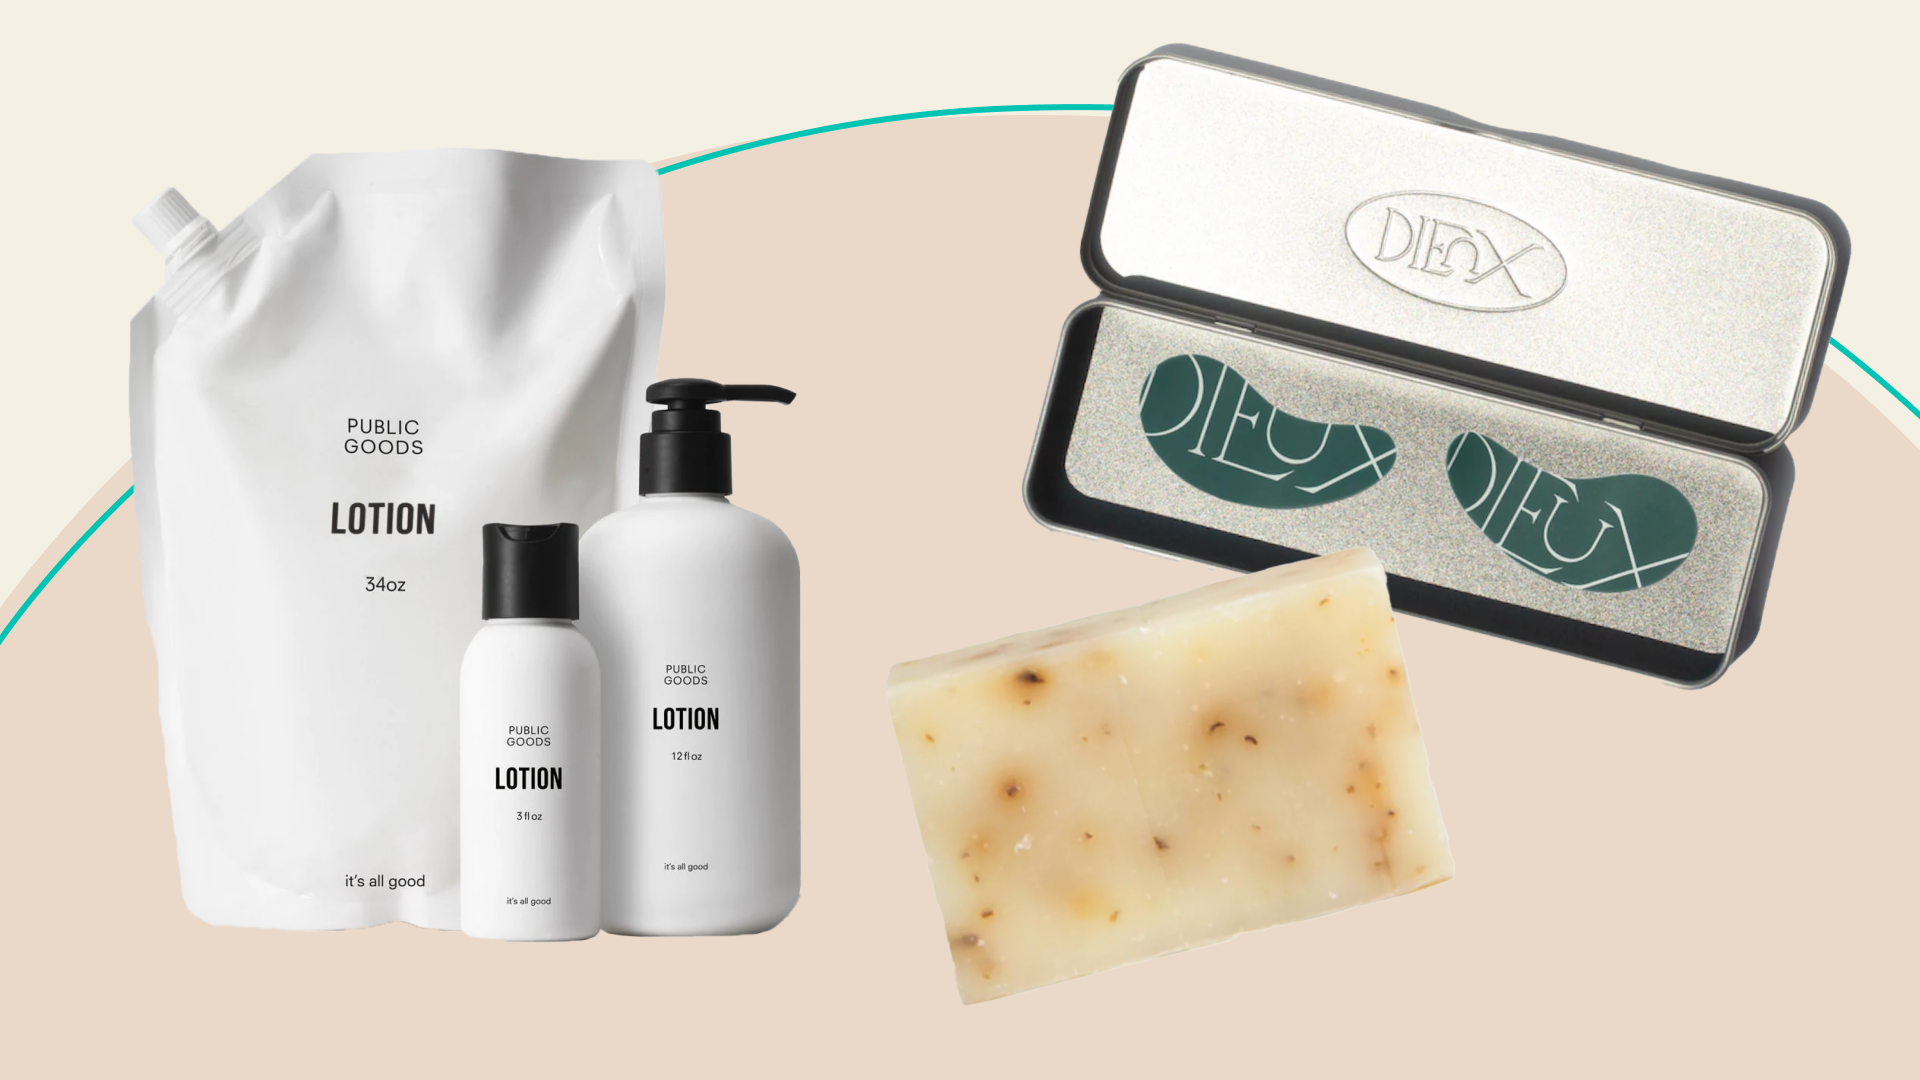 Our fave reusable, refillable, sustainable beauty products